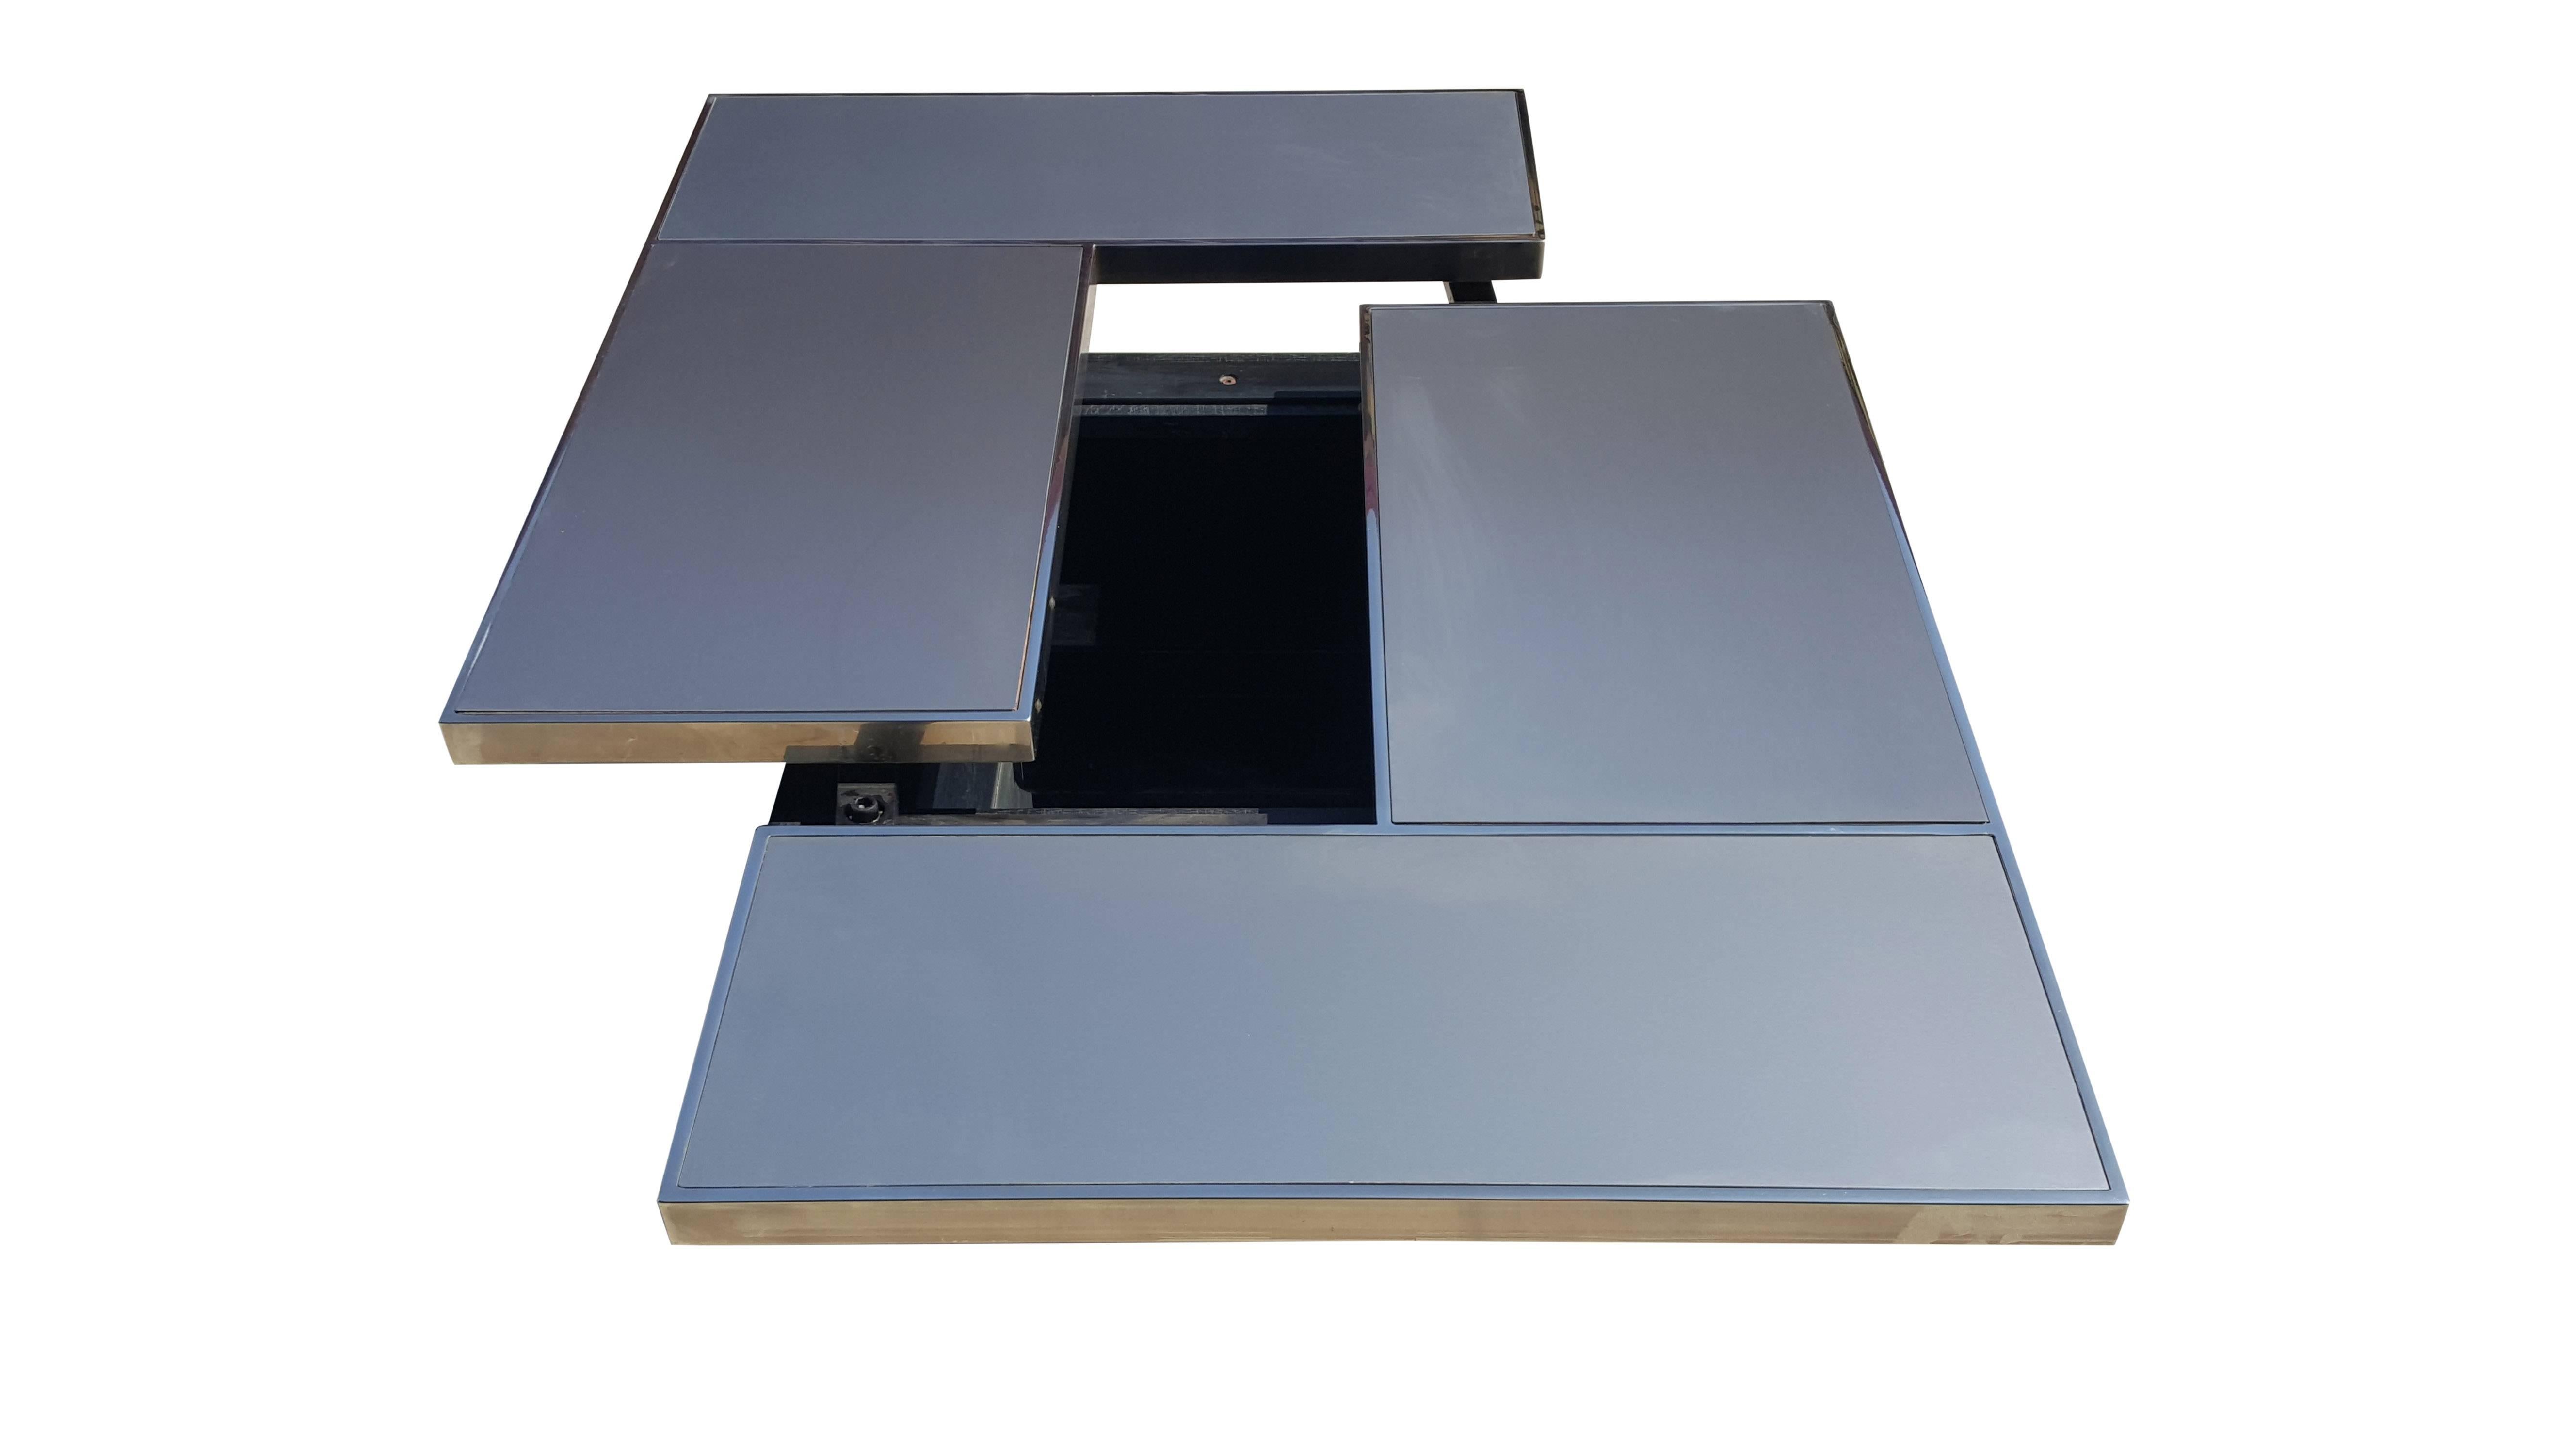 Special sliding table in stainless steel with hidden bar from Belgo Chrom. In the style of Willy Rizzo and Maison Jansen. The table has chrome steel edges and a black laminated base.